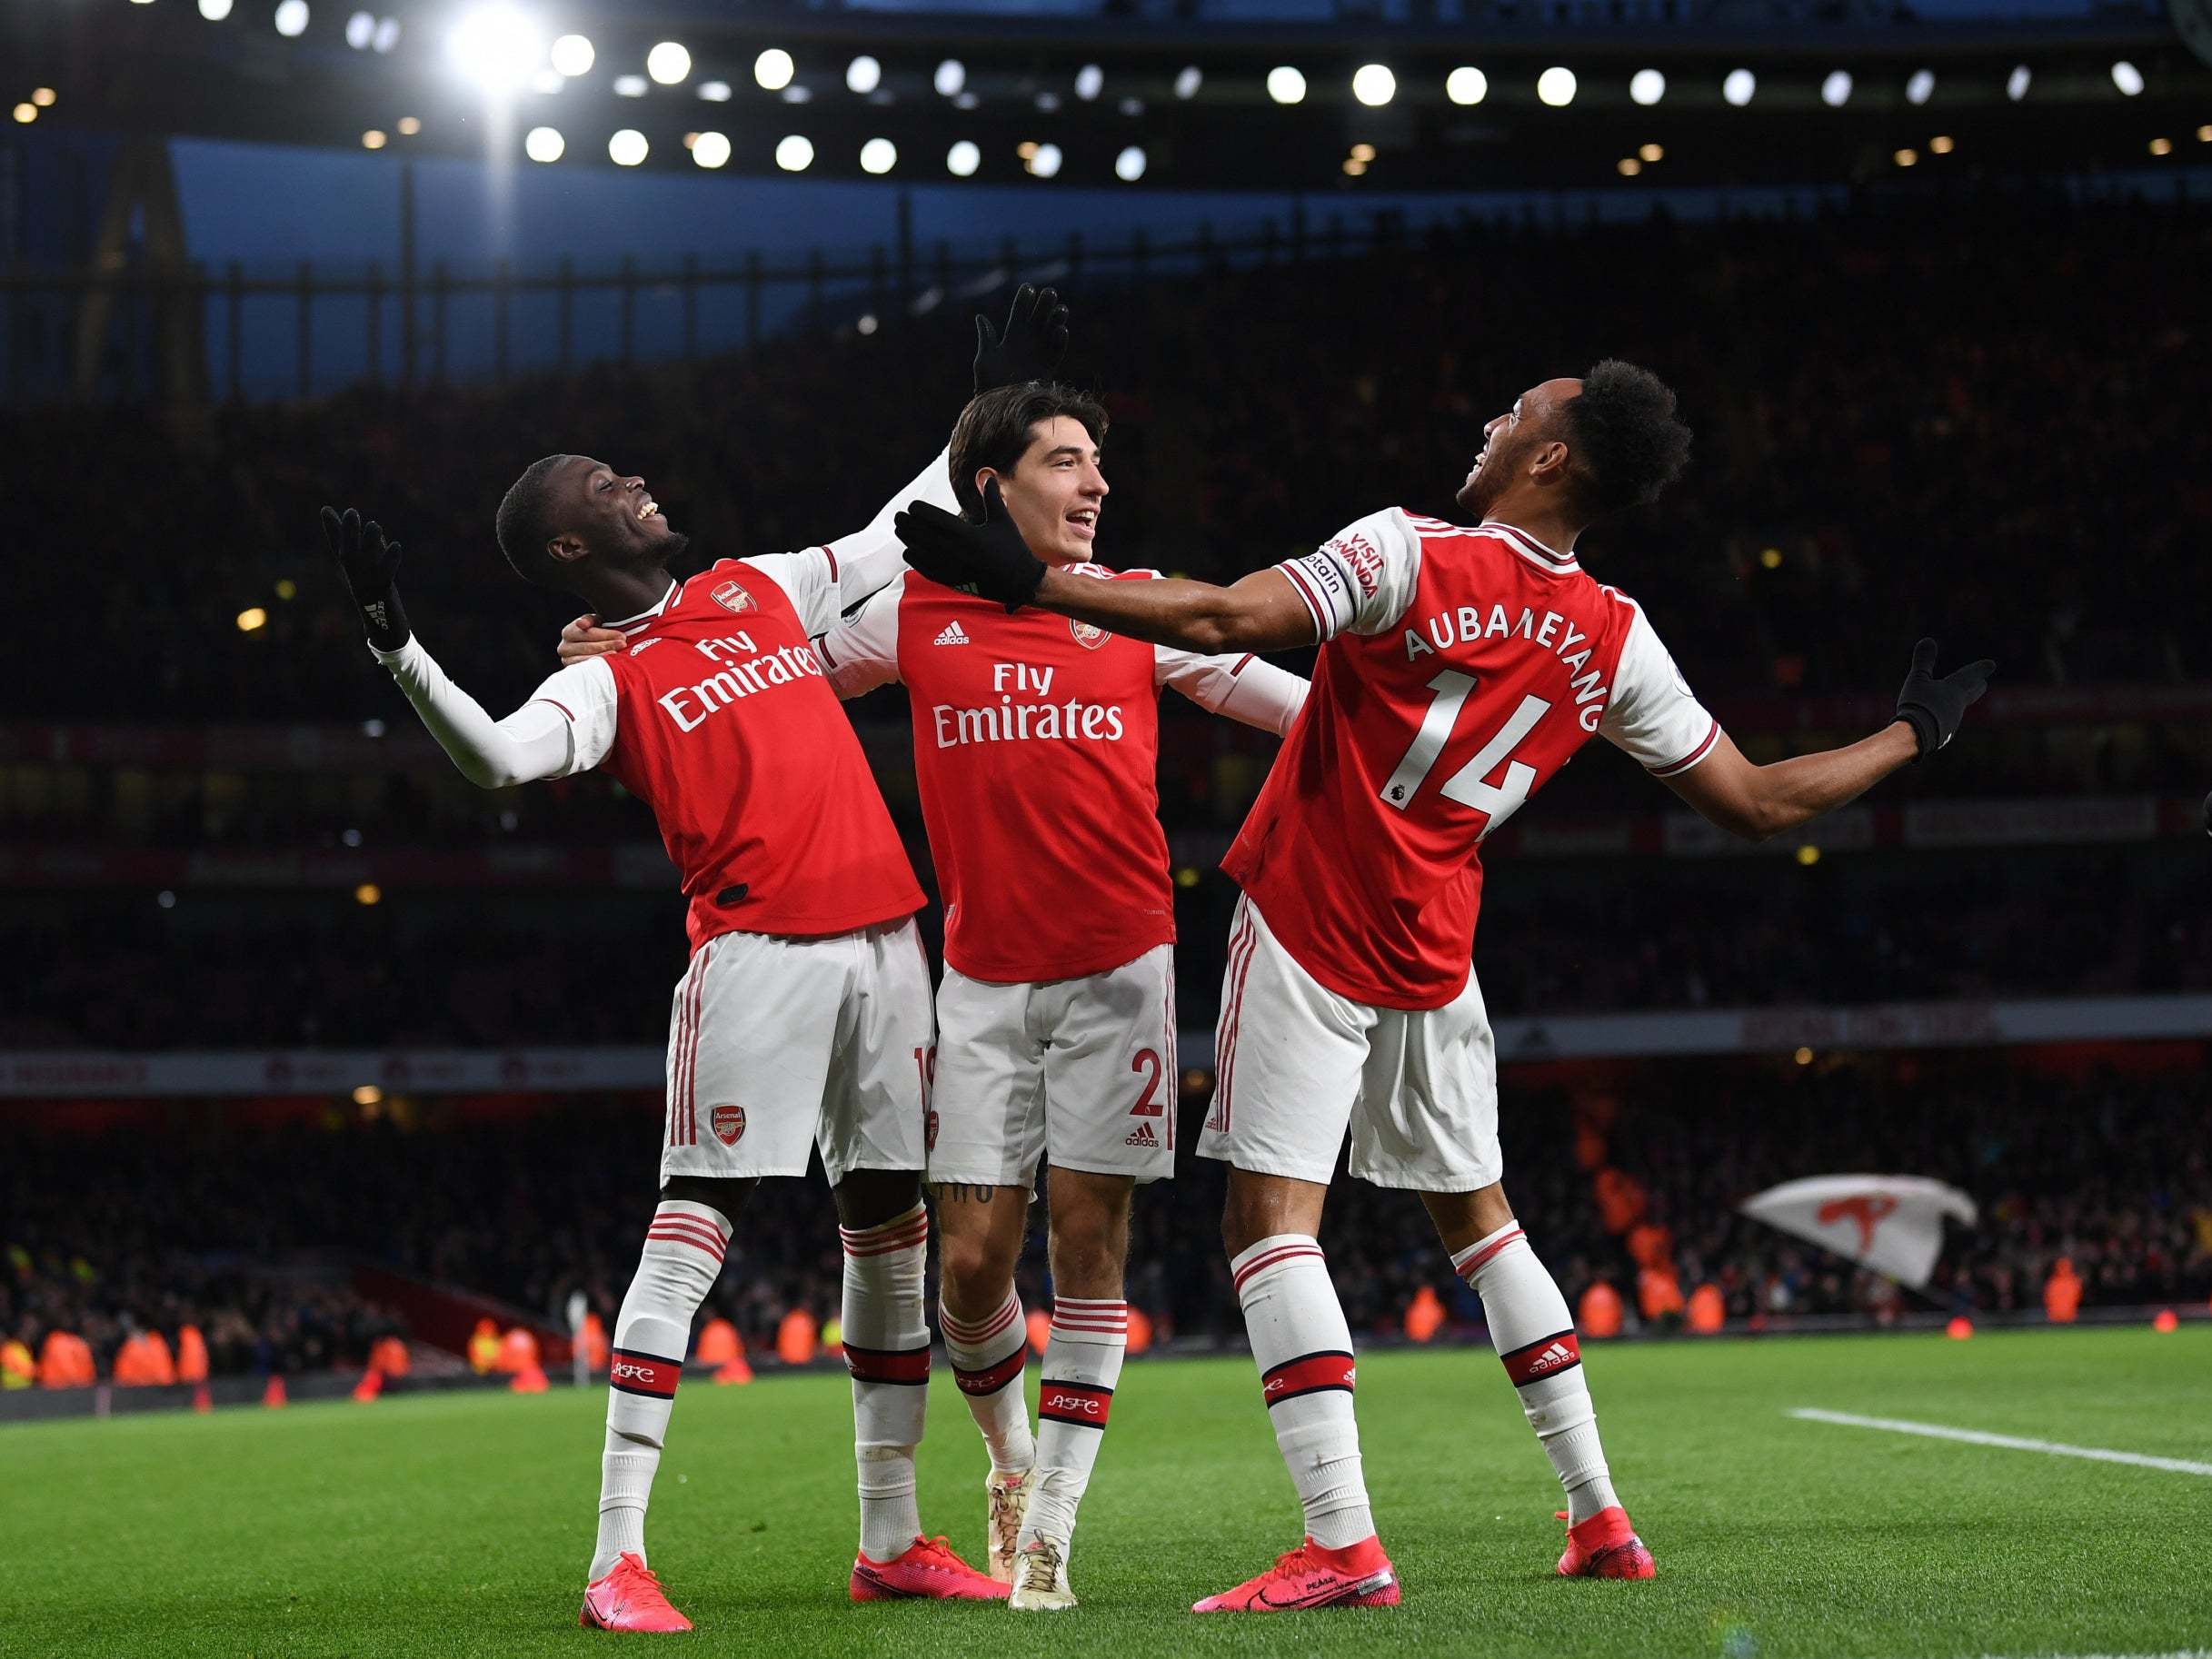 Arsenal vs Everton result Pierre-Emerick Aubameyang leads Gunners to victory The Independent The Independent